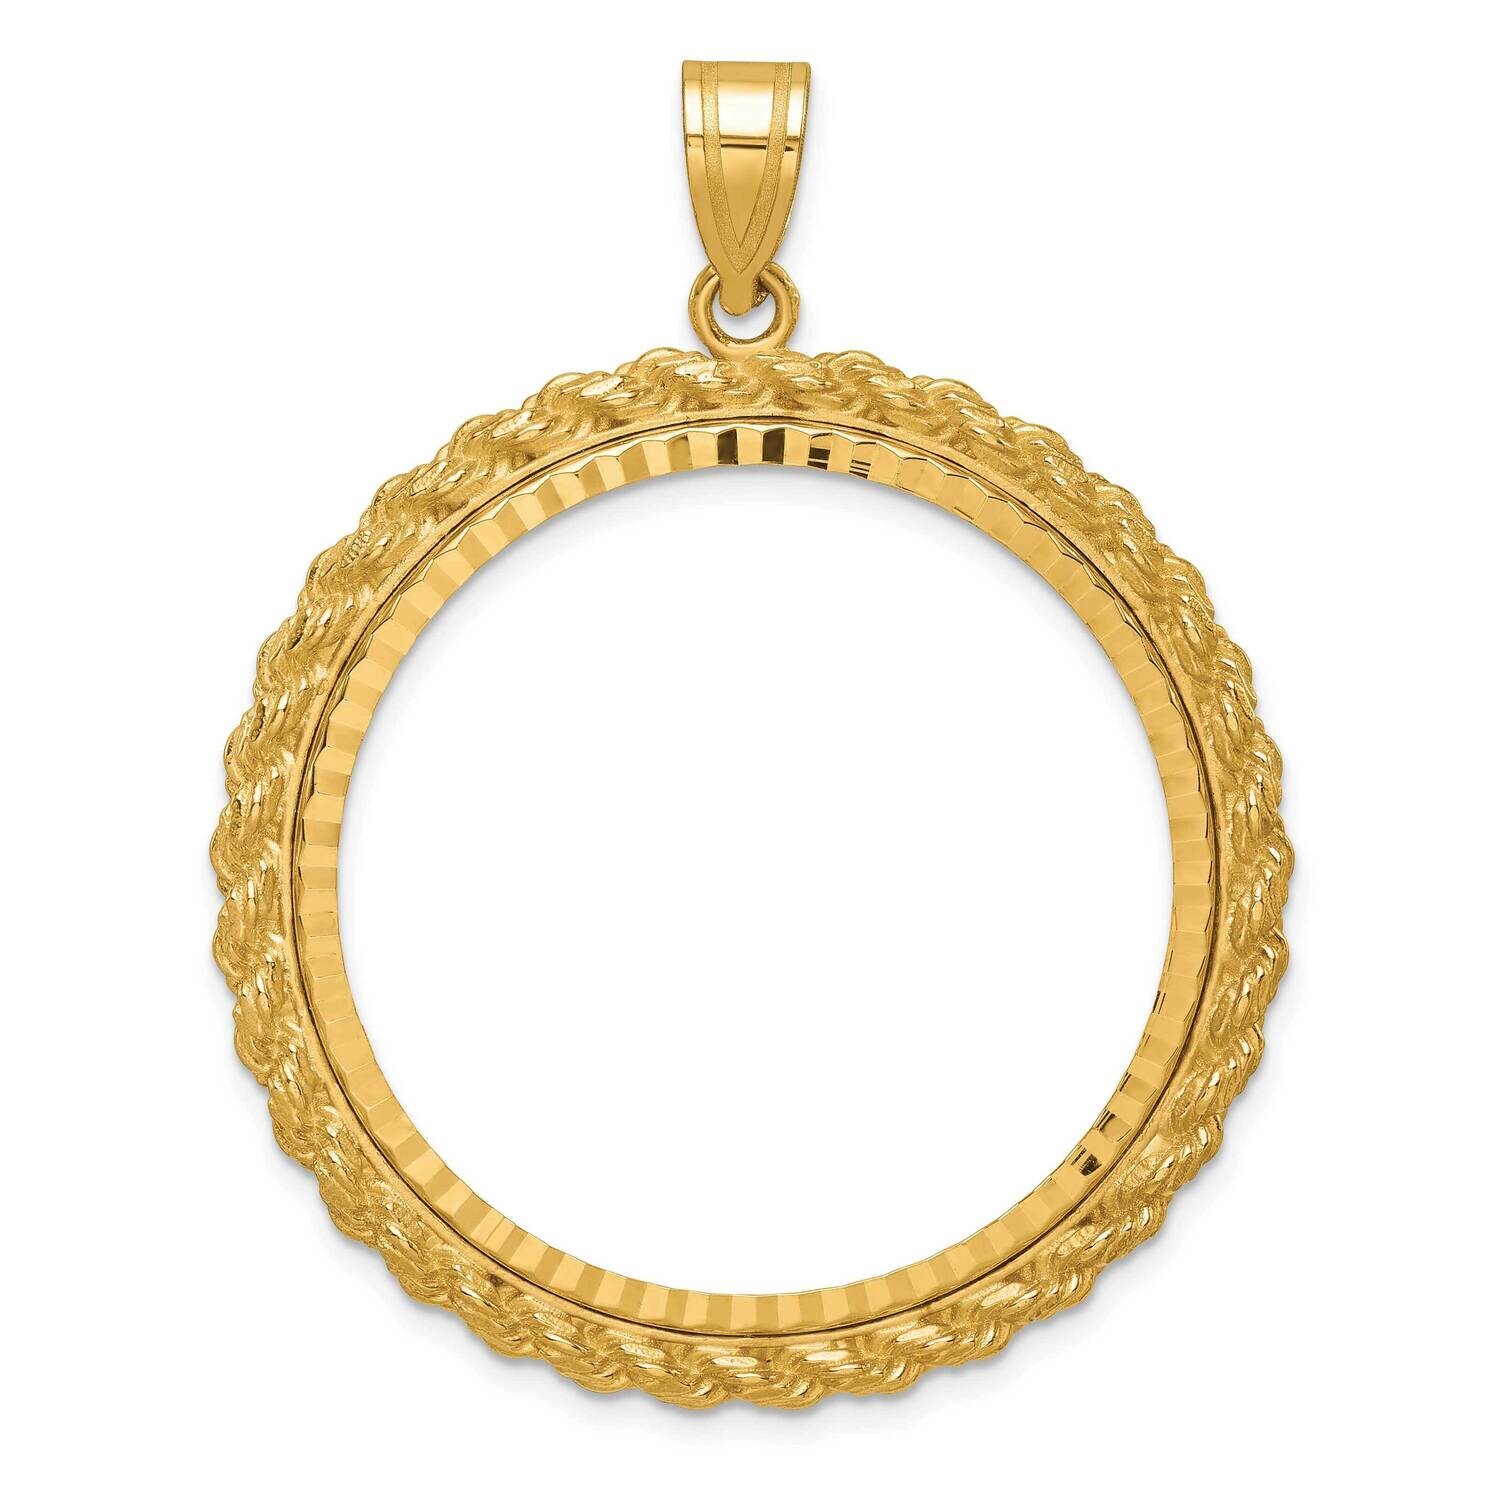 Diamond-Cut Casted Rope Prong 32.7mm Coin Bezel Pendant 14k Gold C8186/32.7